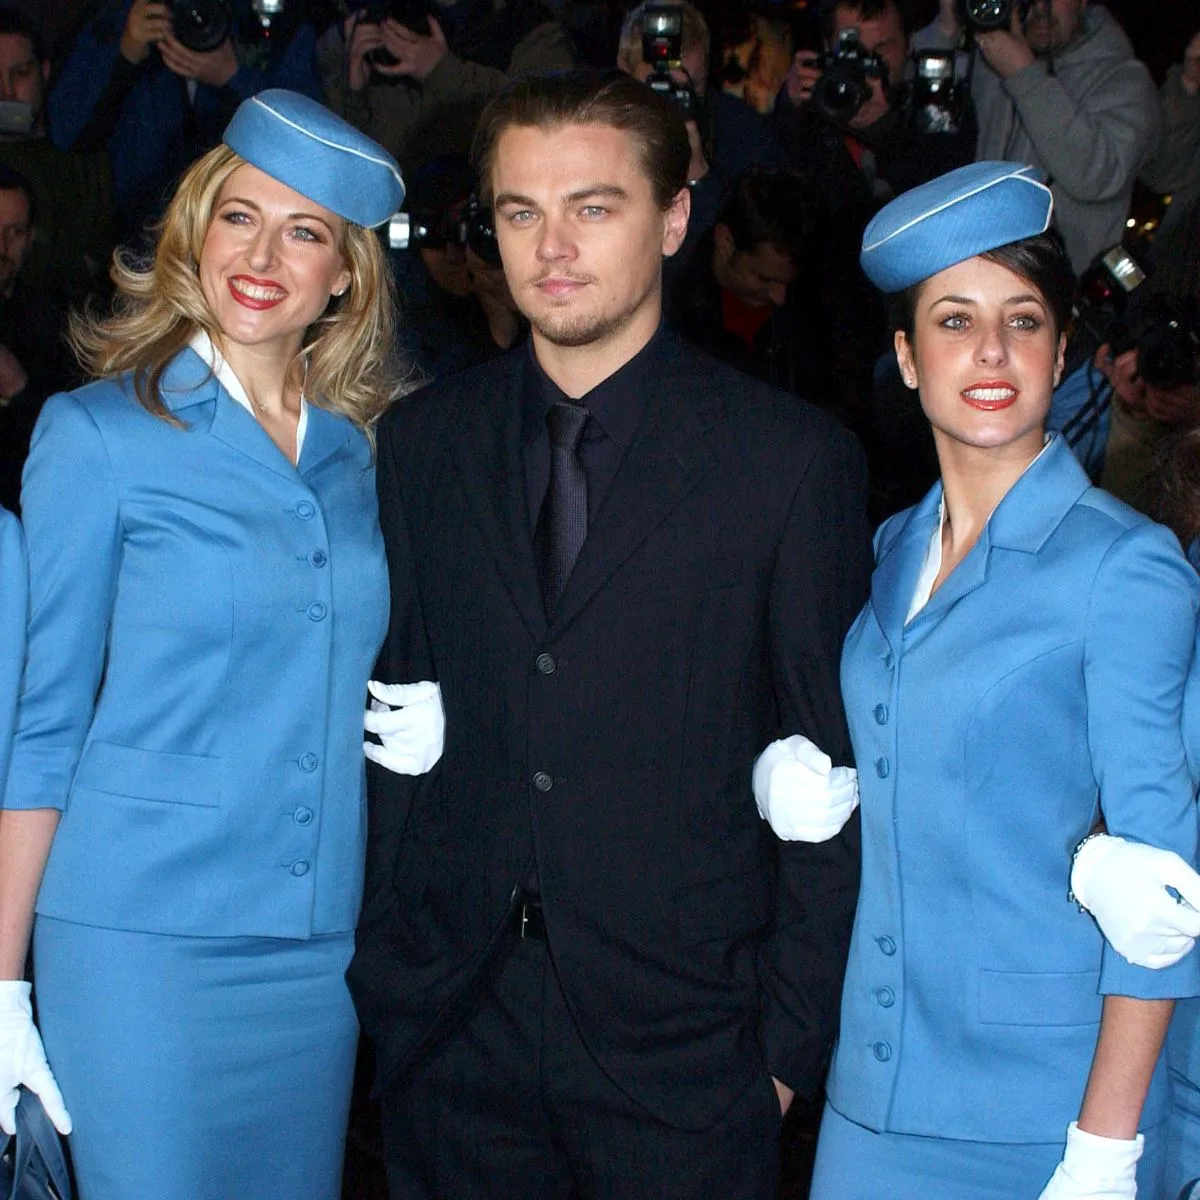 Leonardo dicaprio in Catch Me If You Can